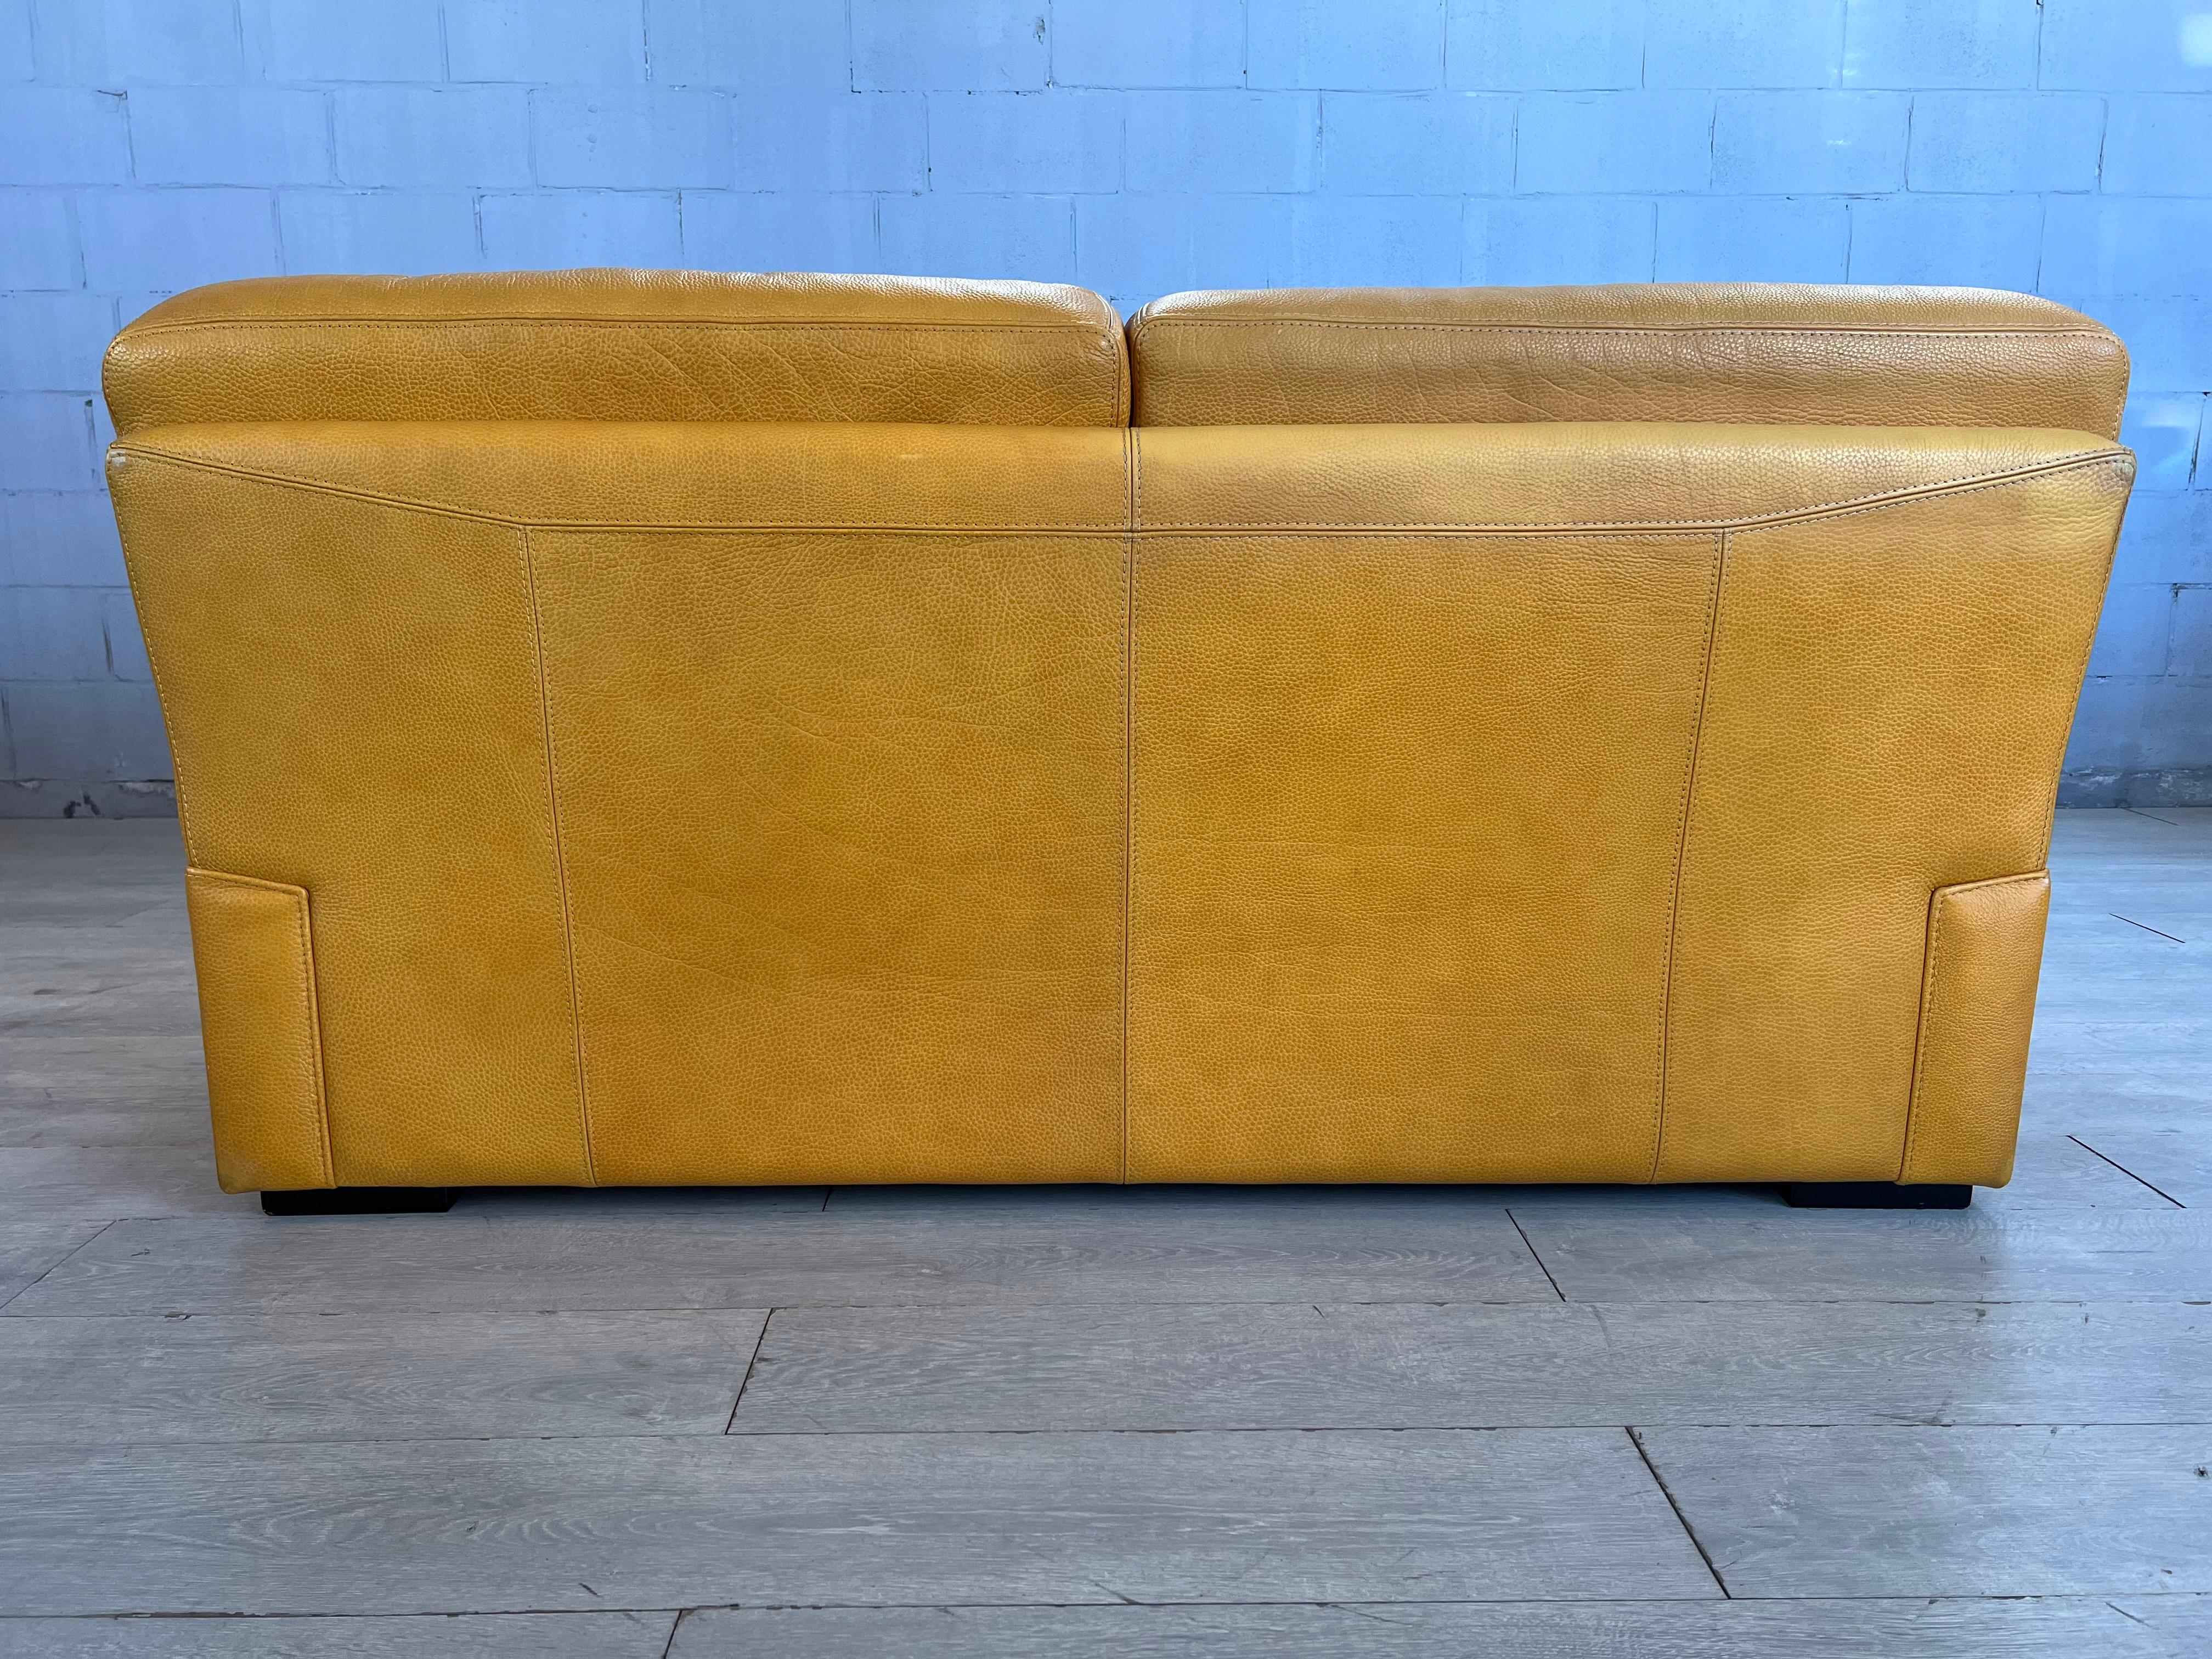 Original Vintage Modern Yellow Leather Sofa Lounger by Roche Bobois, Stamped 4